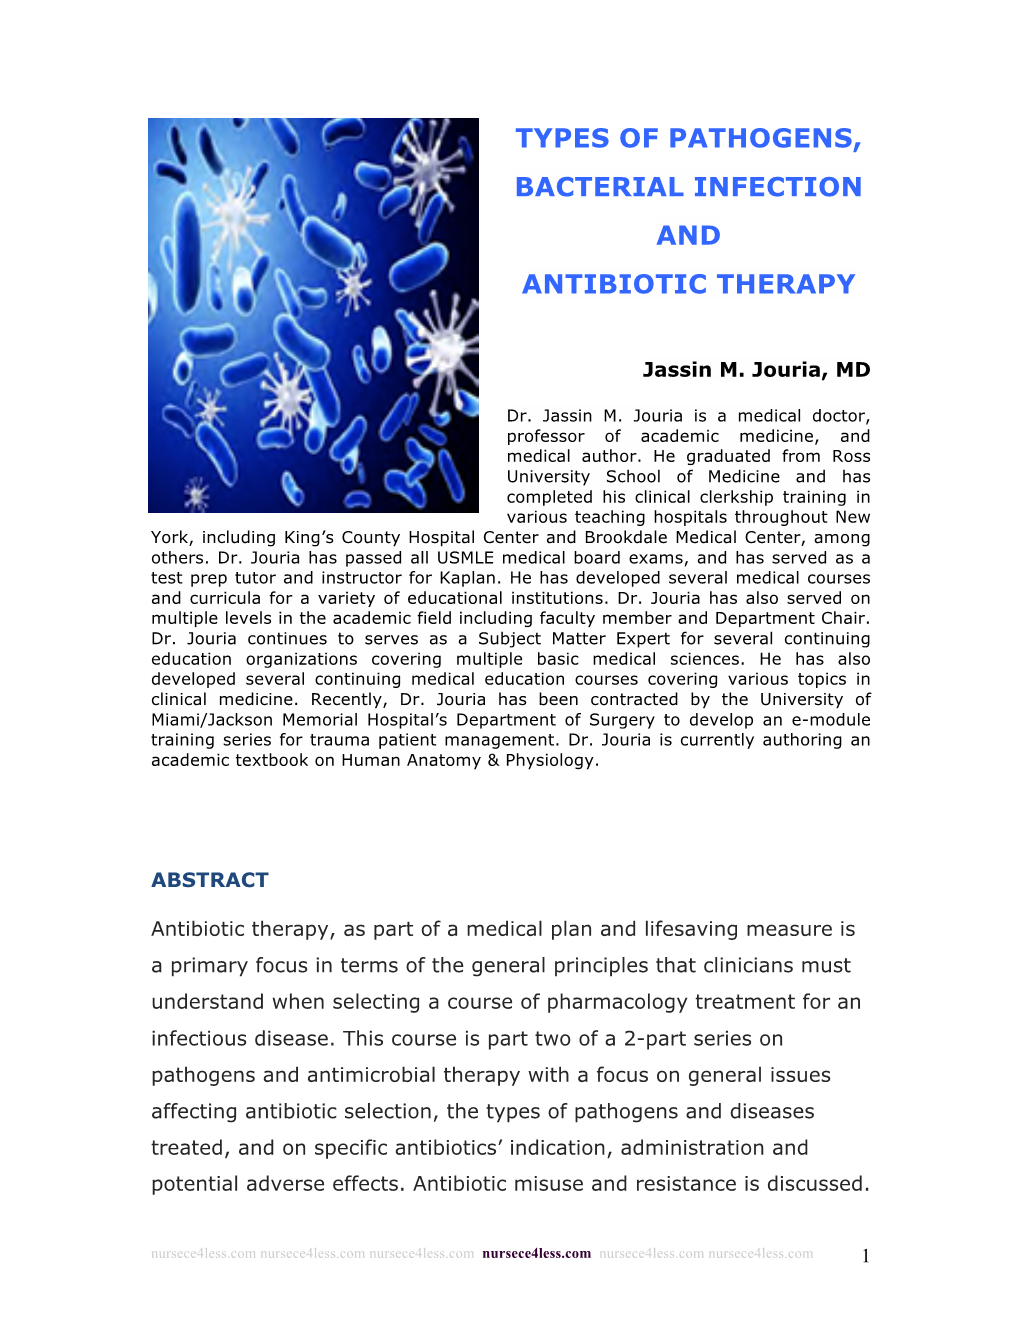 Types of Pathogens, Bacterial Infection and Antibiotic Therapy